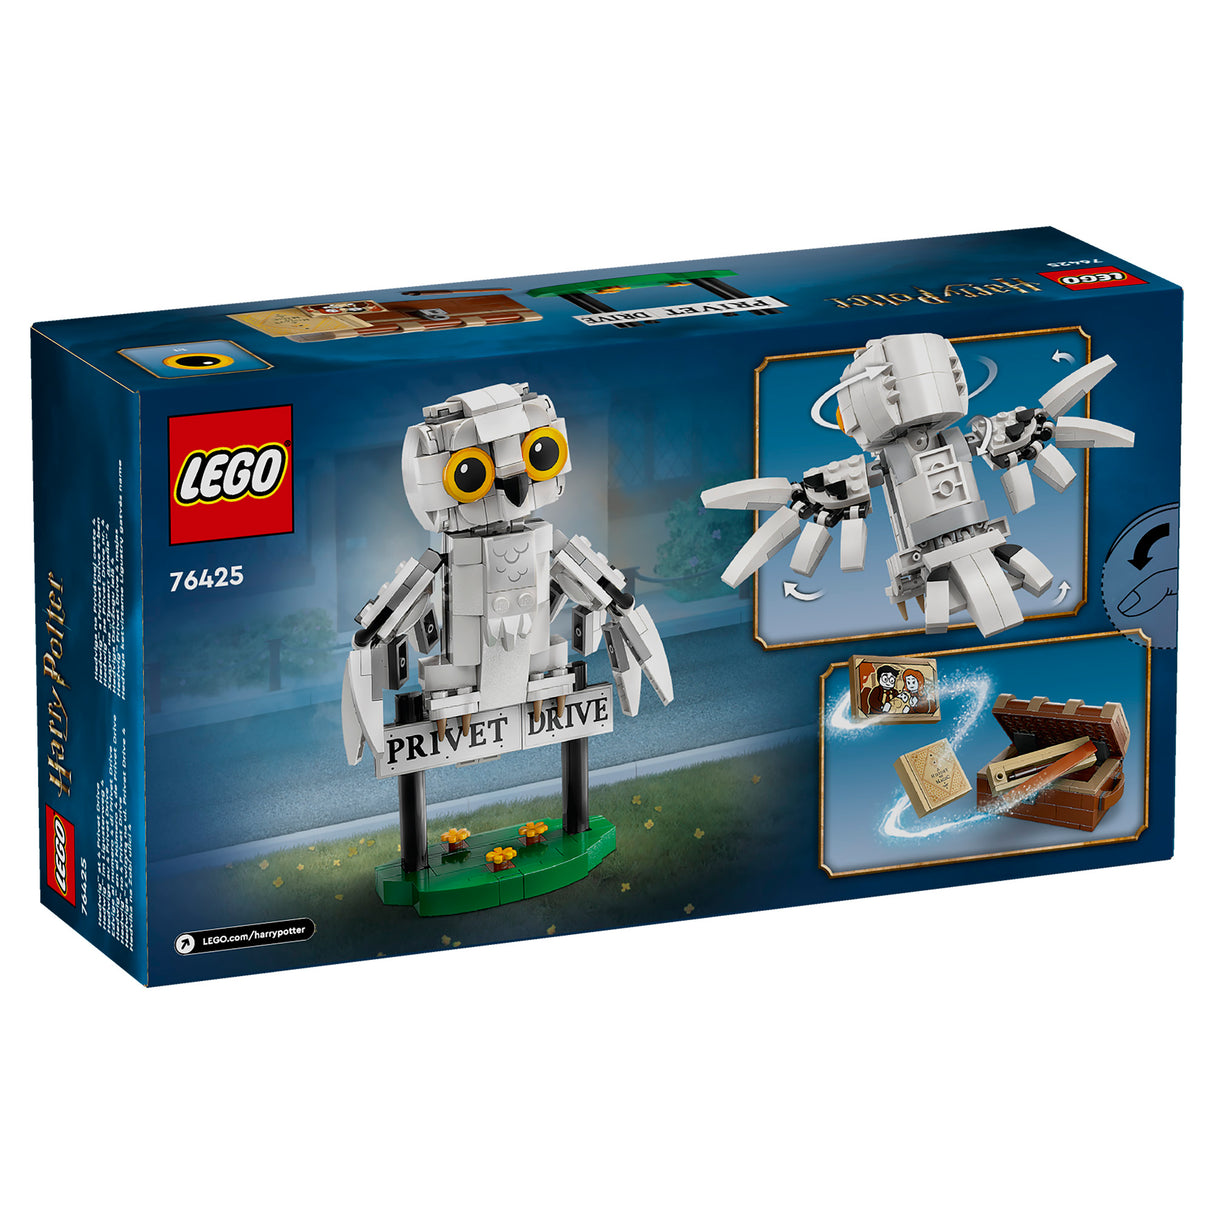 LEGO Harry Potter Hedwig At 4 Privet Drive 76425, (337-Pieces)